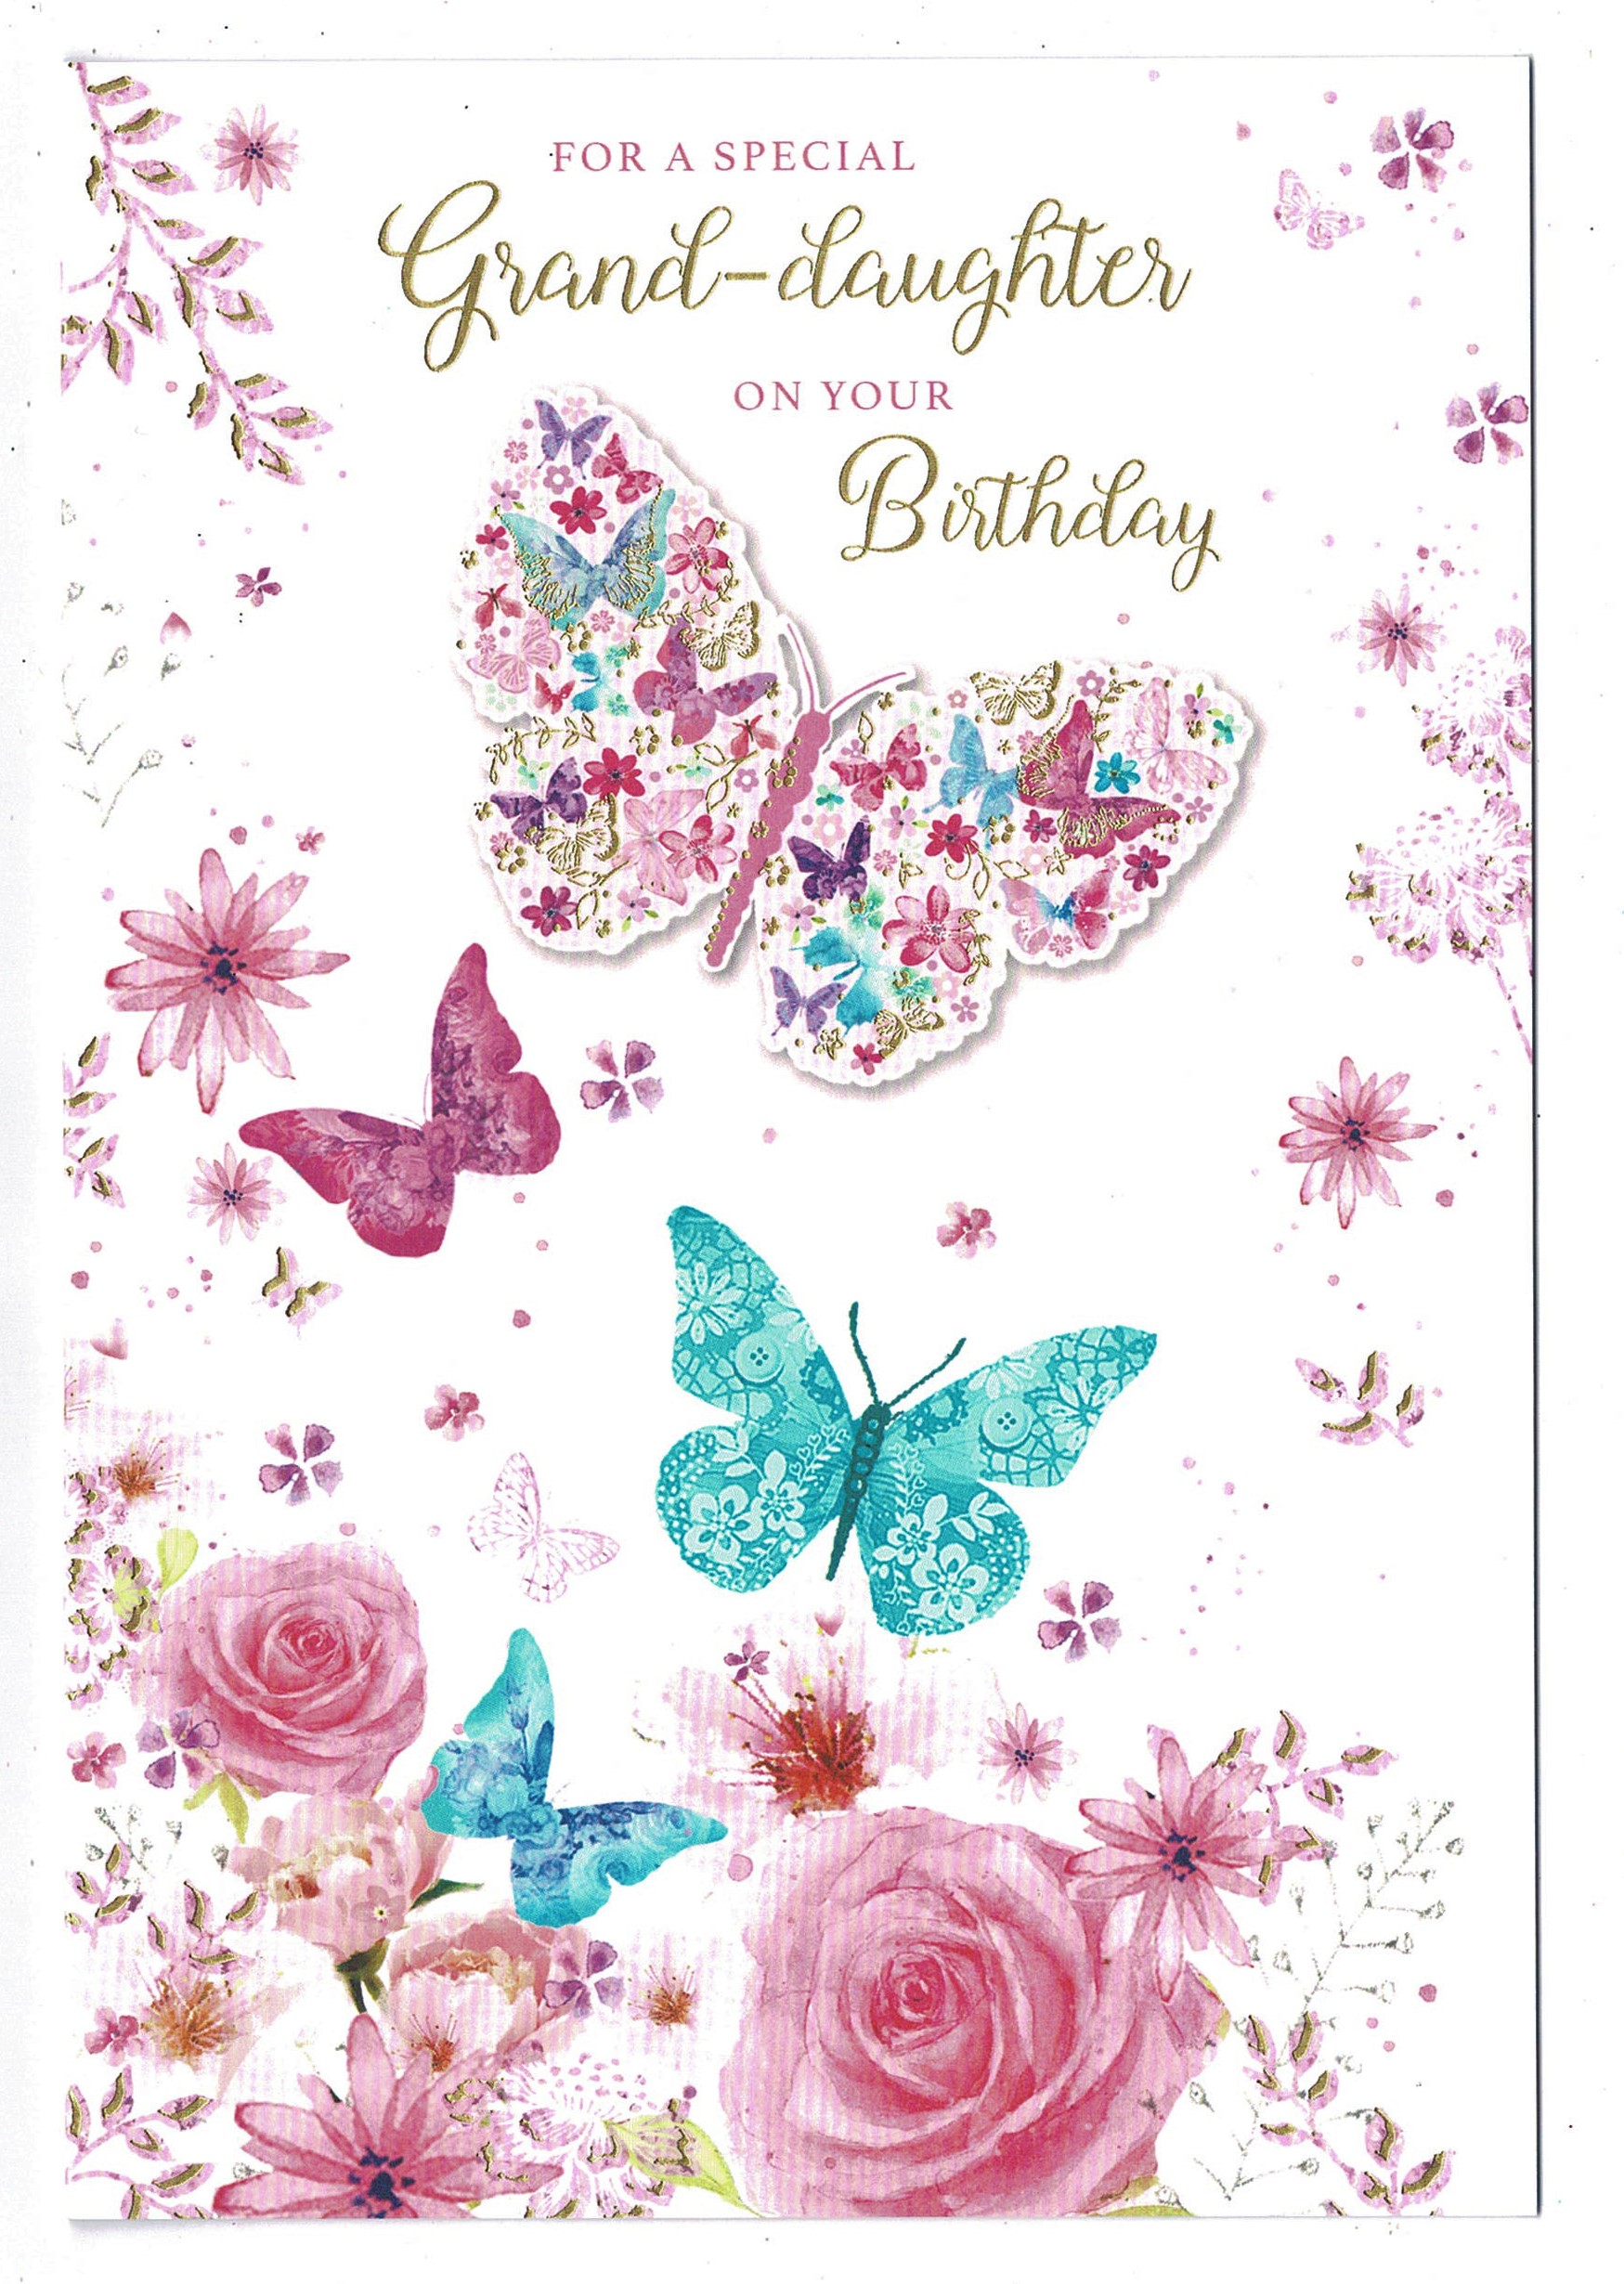 Granddaughter Birthday Card ' For A Special Granddaughter On Your ...